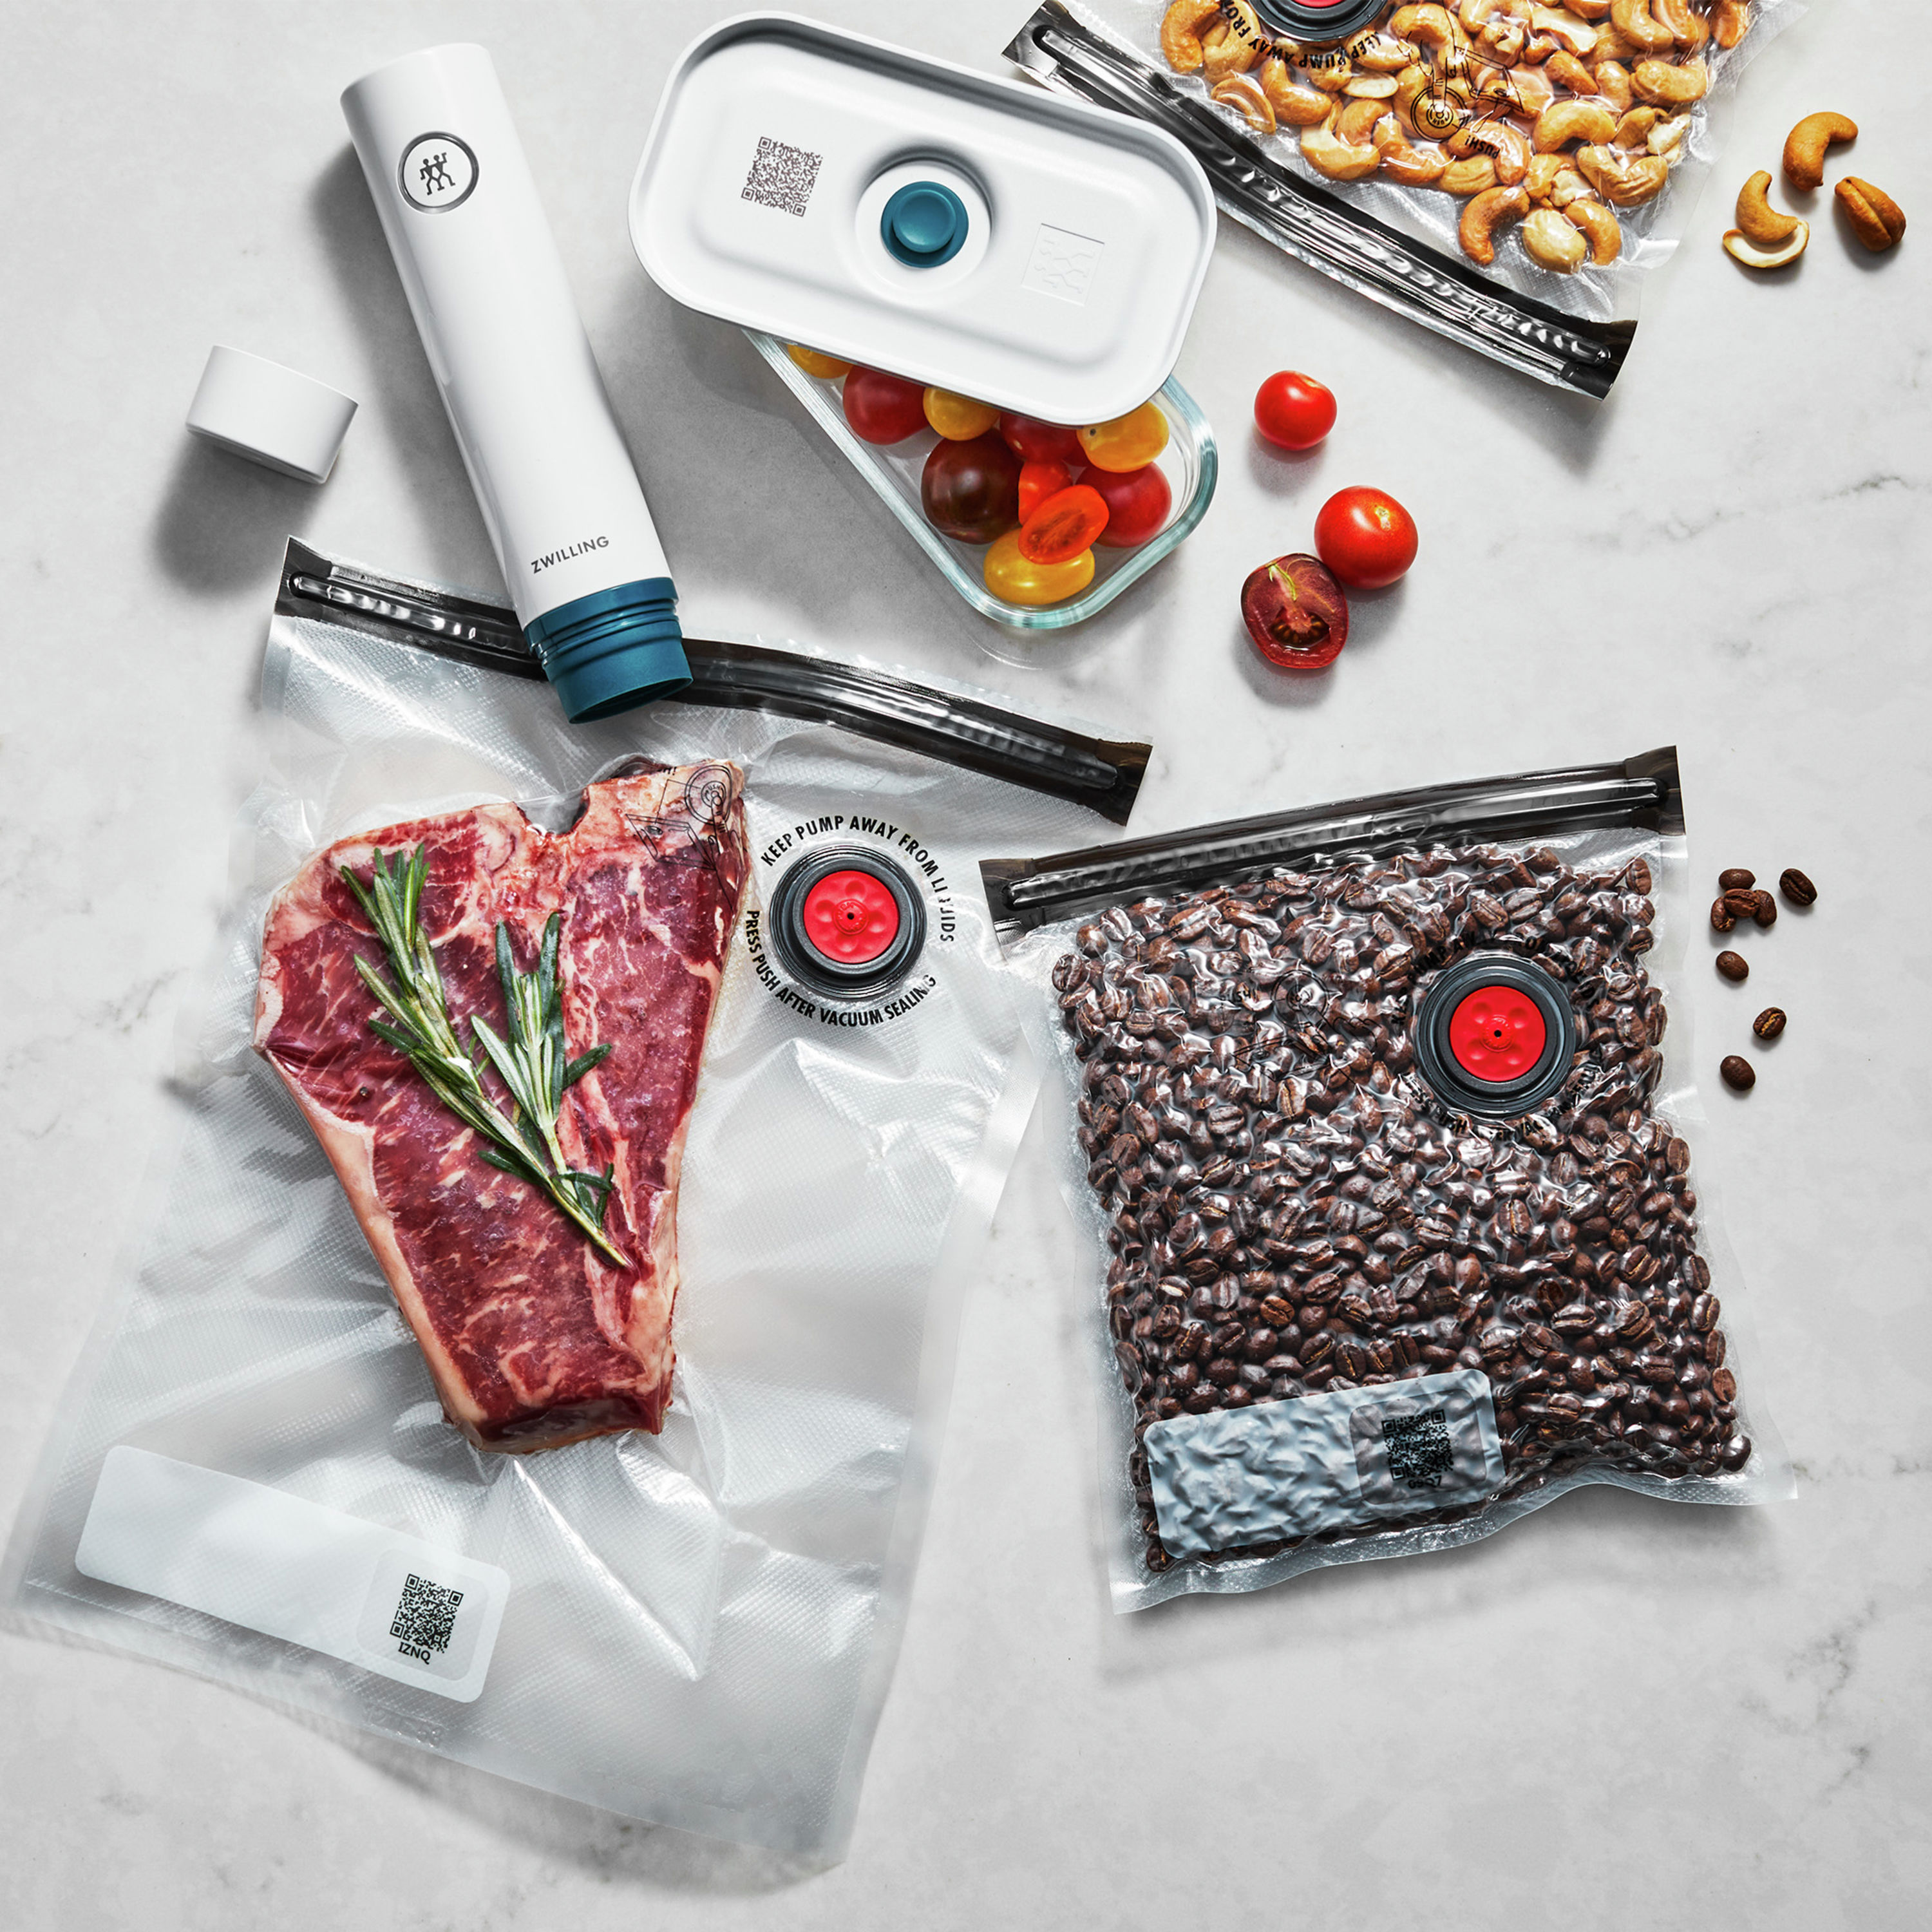 Zwilling Vacuum Sealer Review: Will It Keep My Food Fresher